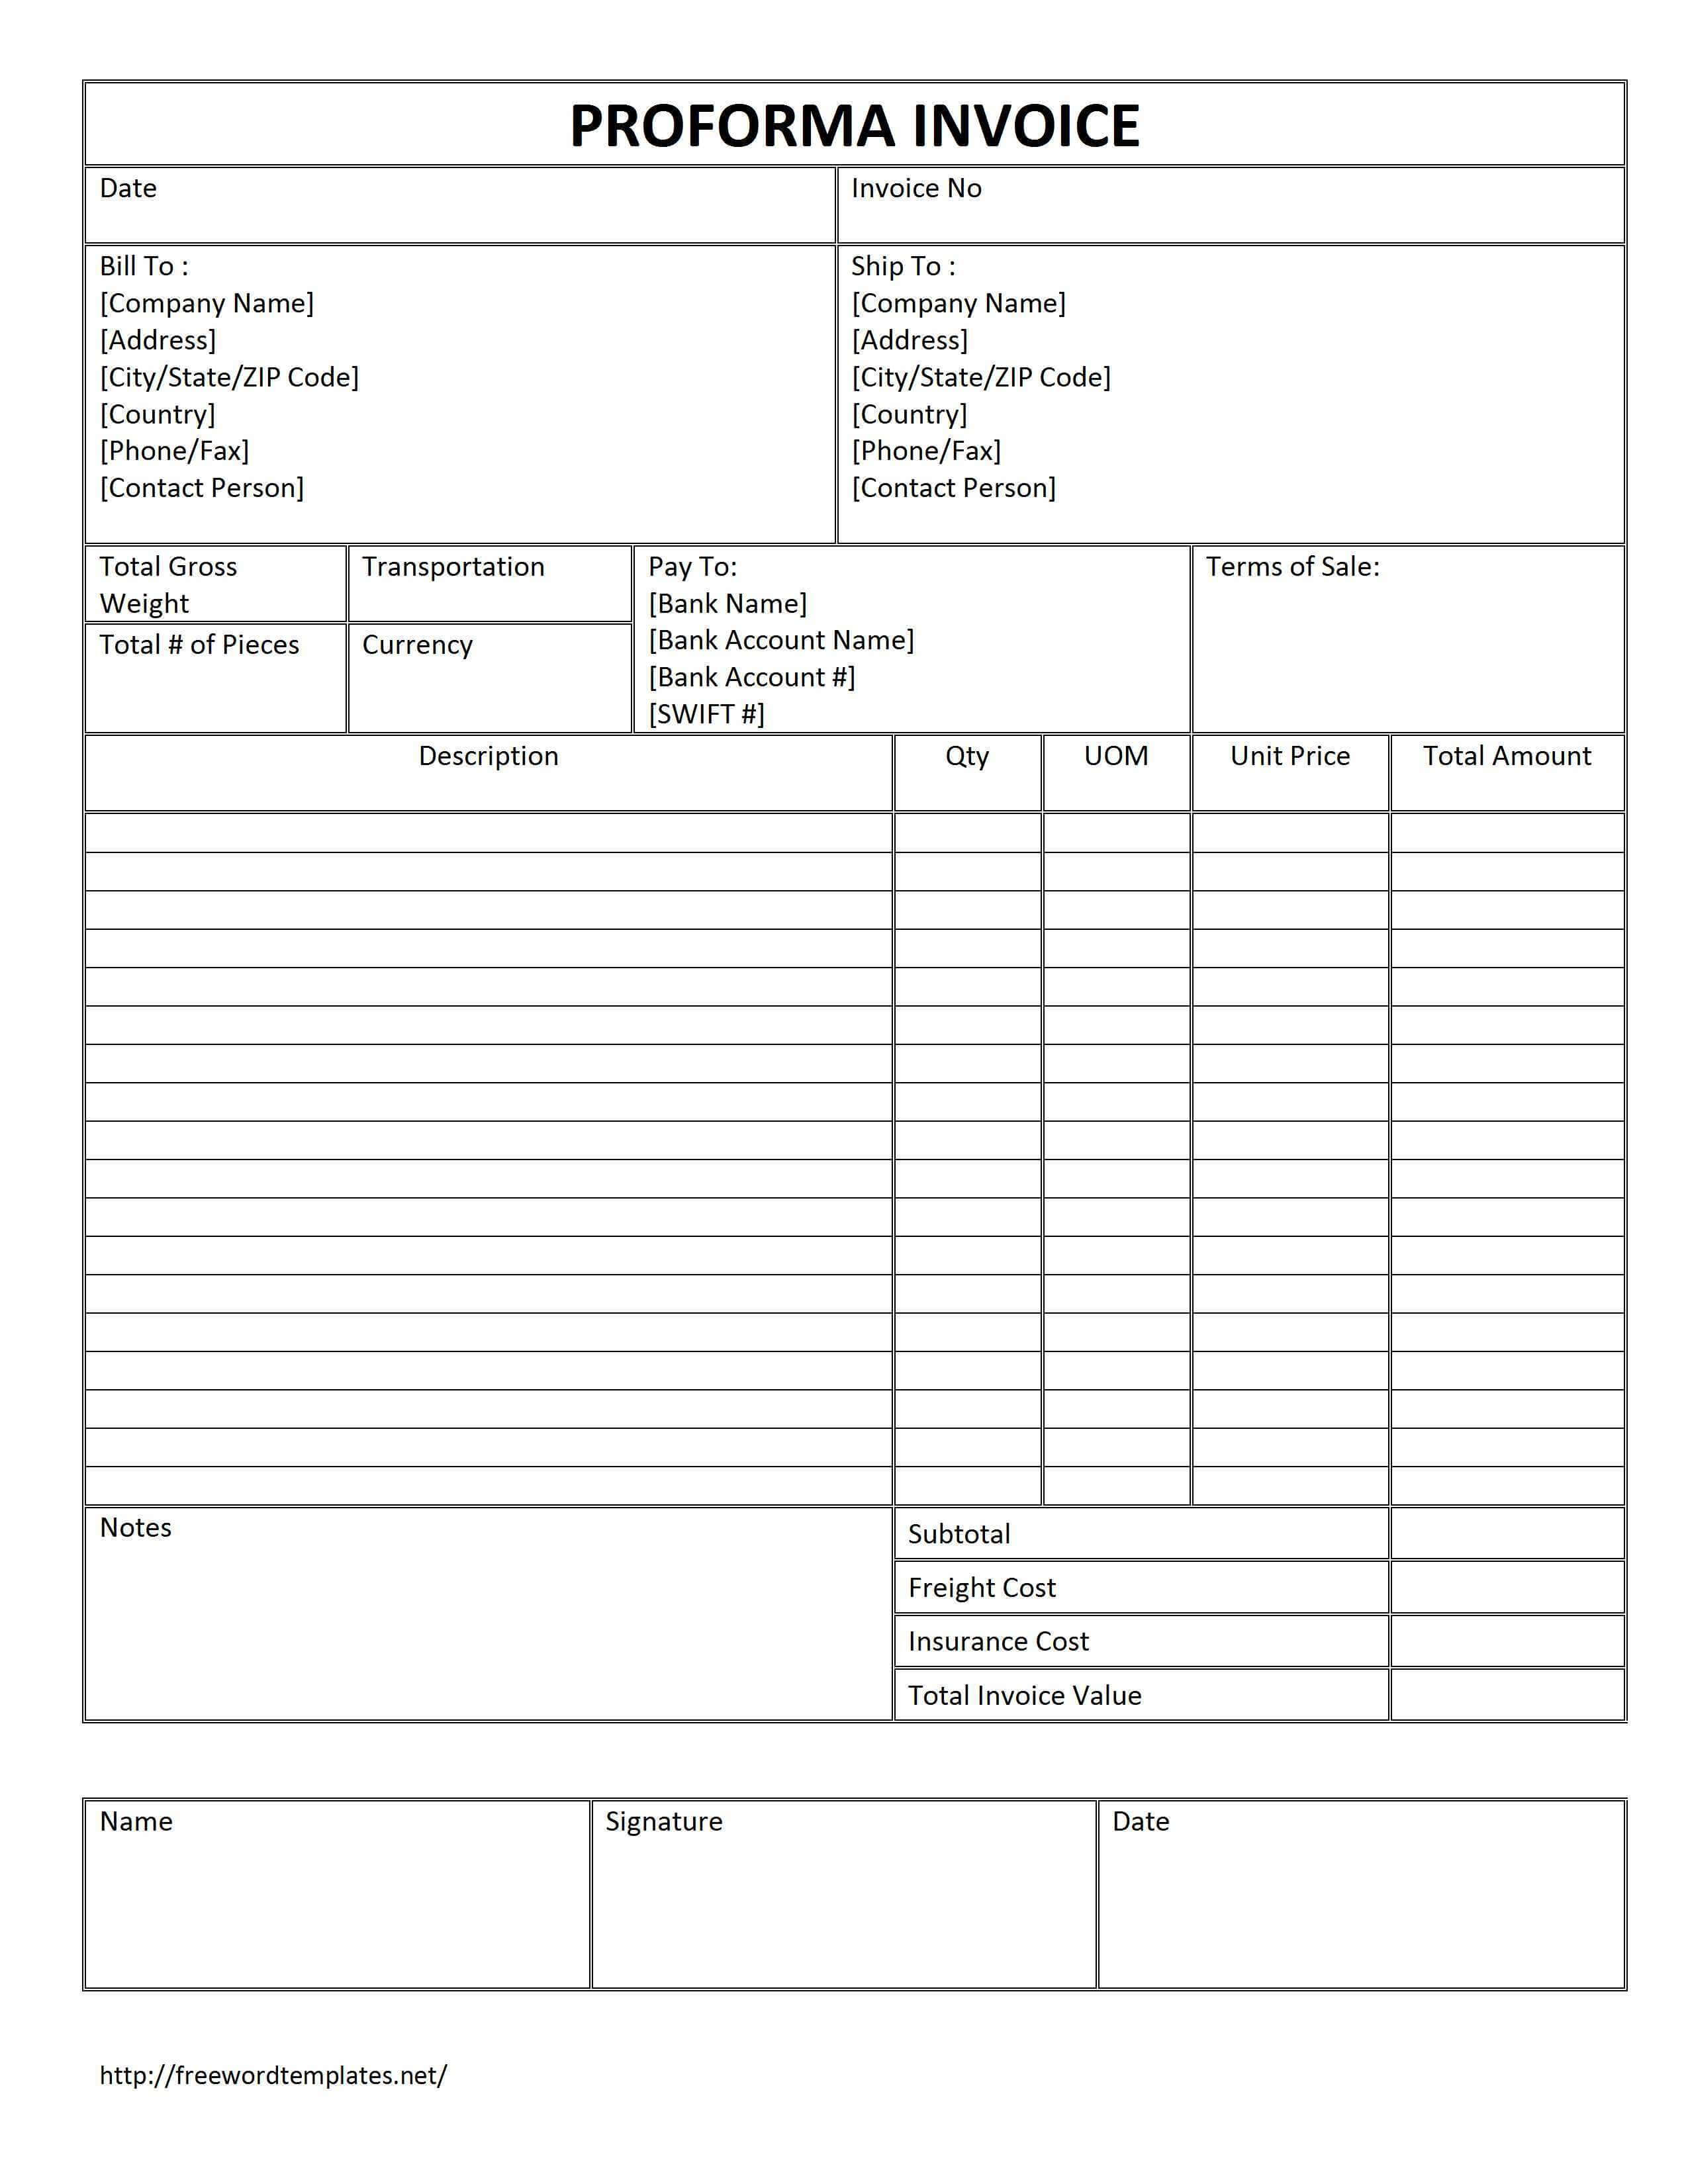 Proforma Invoice Template Free Download Free Proforma Intended For Free Proforma Invoice Template Word